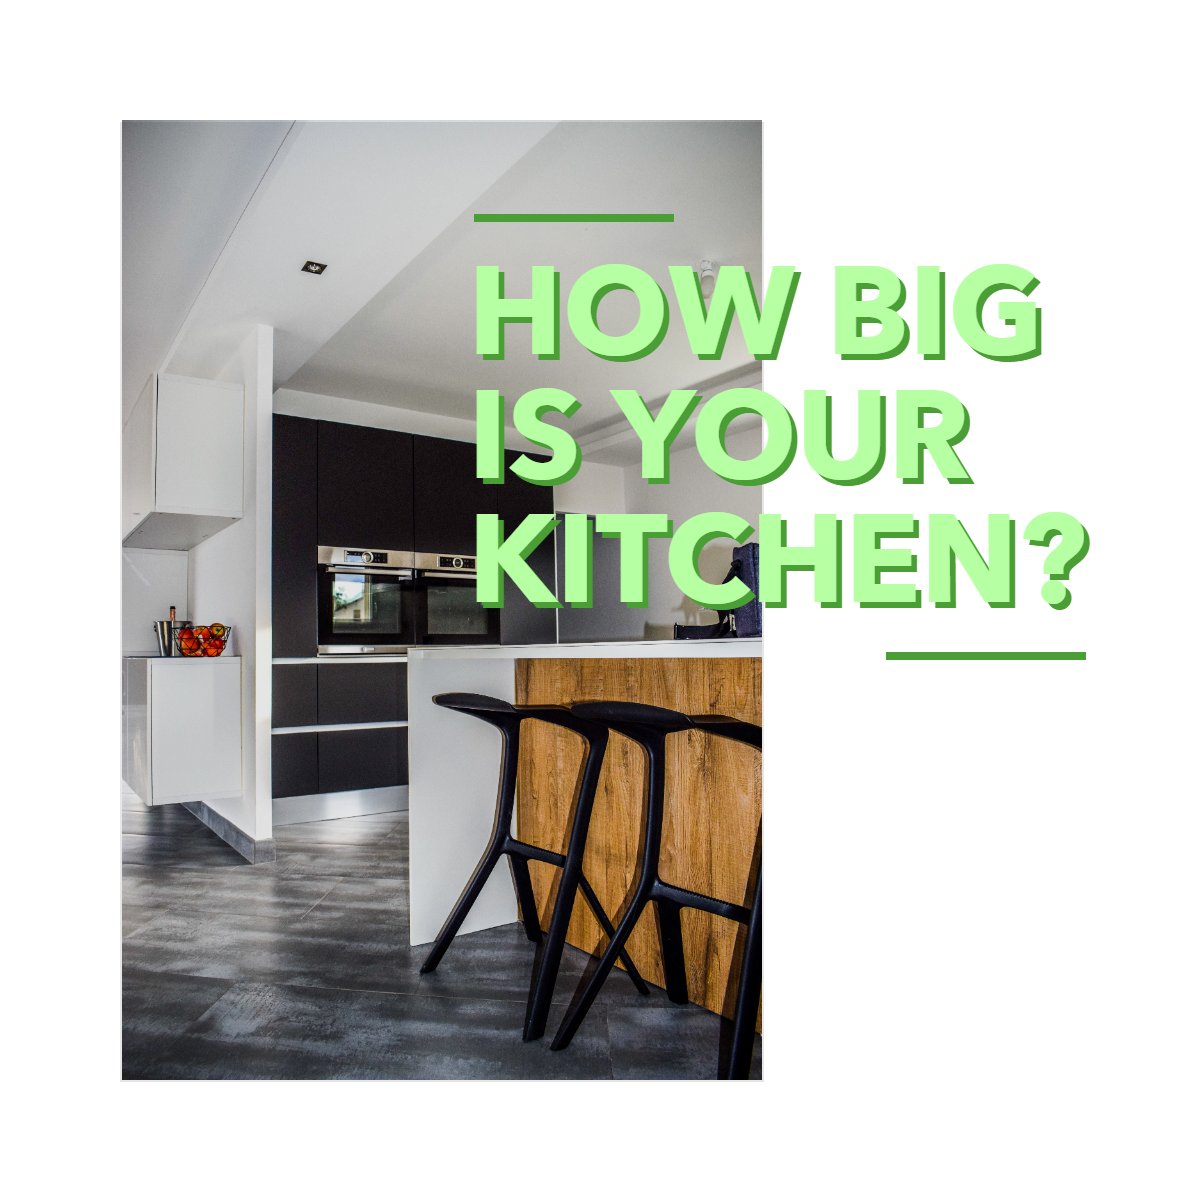 In the US the average kitchen size for single homes is 161 square feet.

How big is your kitchen? Tell us in the comments!  👇

#realestate #kitchensize #kitchen #homes
 #beyondhomesales #homesforsale #whatsmyhomeworth #realestate #realestateagent #Realtor